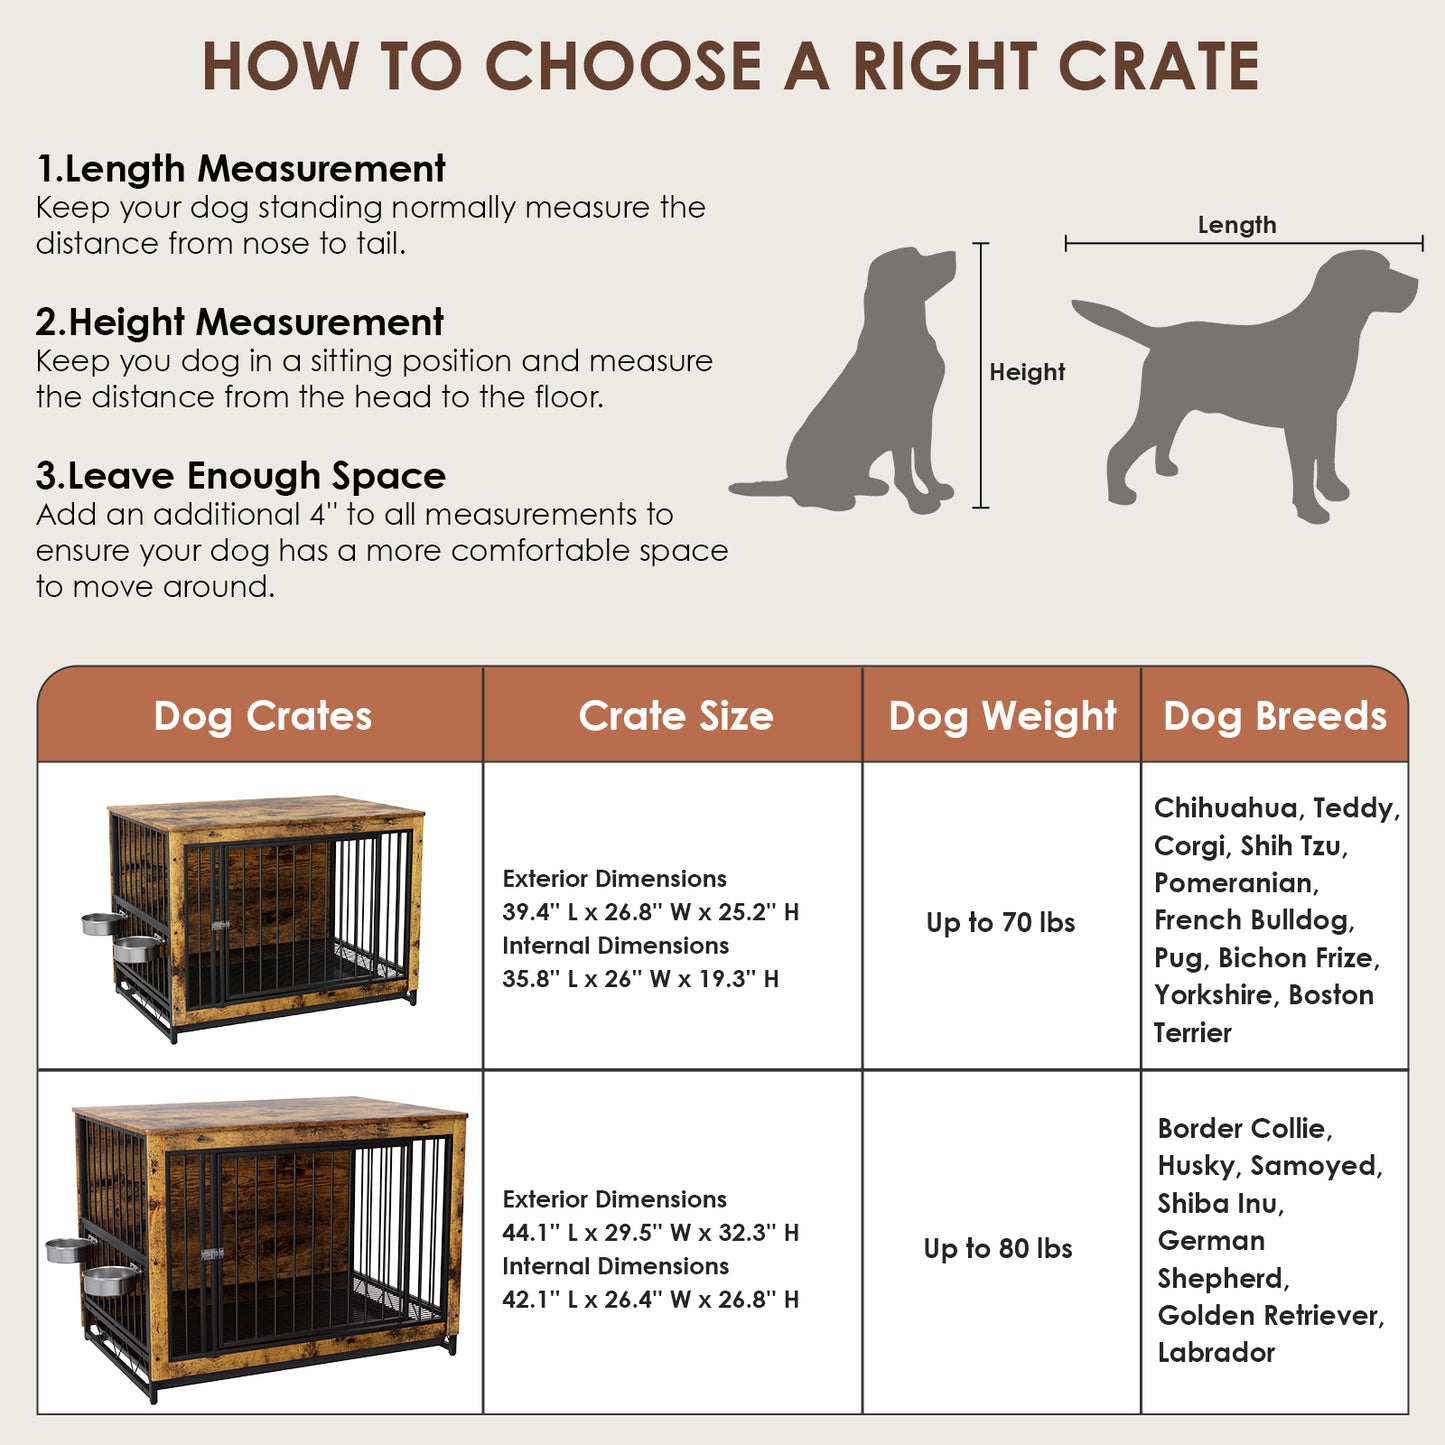 Arlopu Dog Crate Furniture, Modern Wooden End Table Indoor Kennel for Dogs up to 70 lbs, Heavy Duty Dog Cage House with Removable Tray, 2 Stainless Steel Bowls